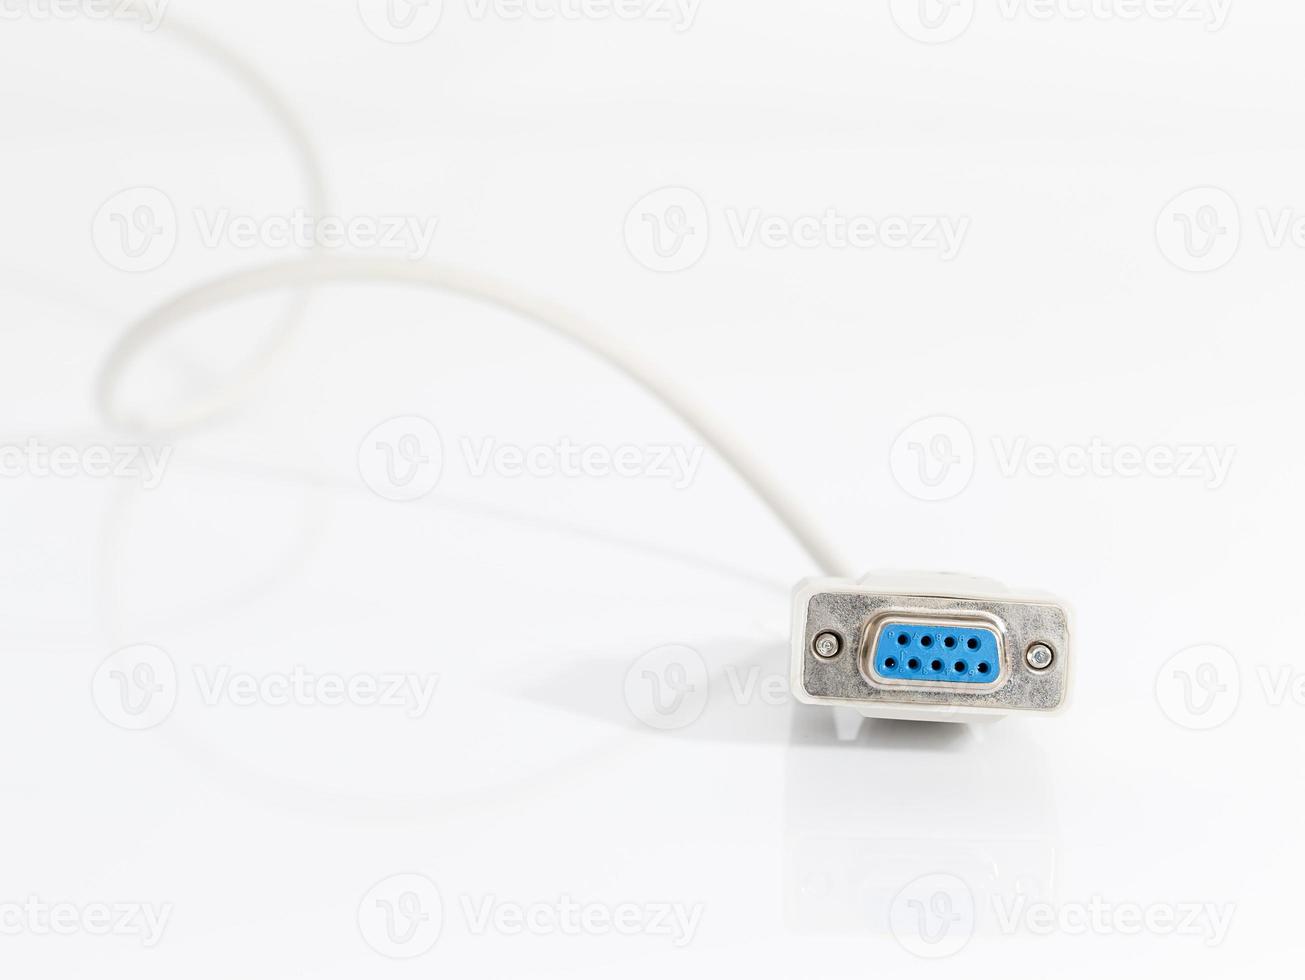 VGA cables connector with white cord photo